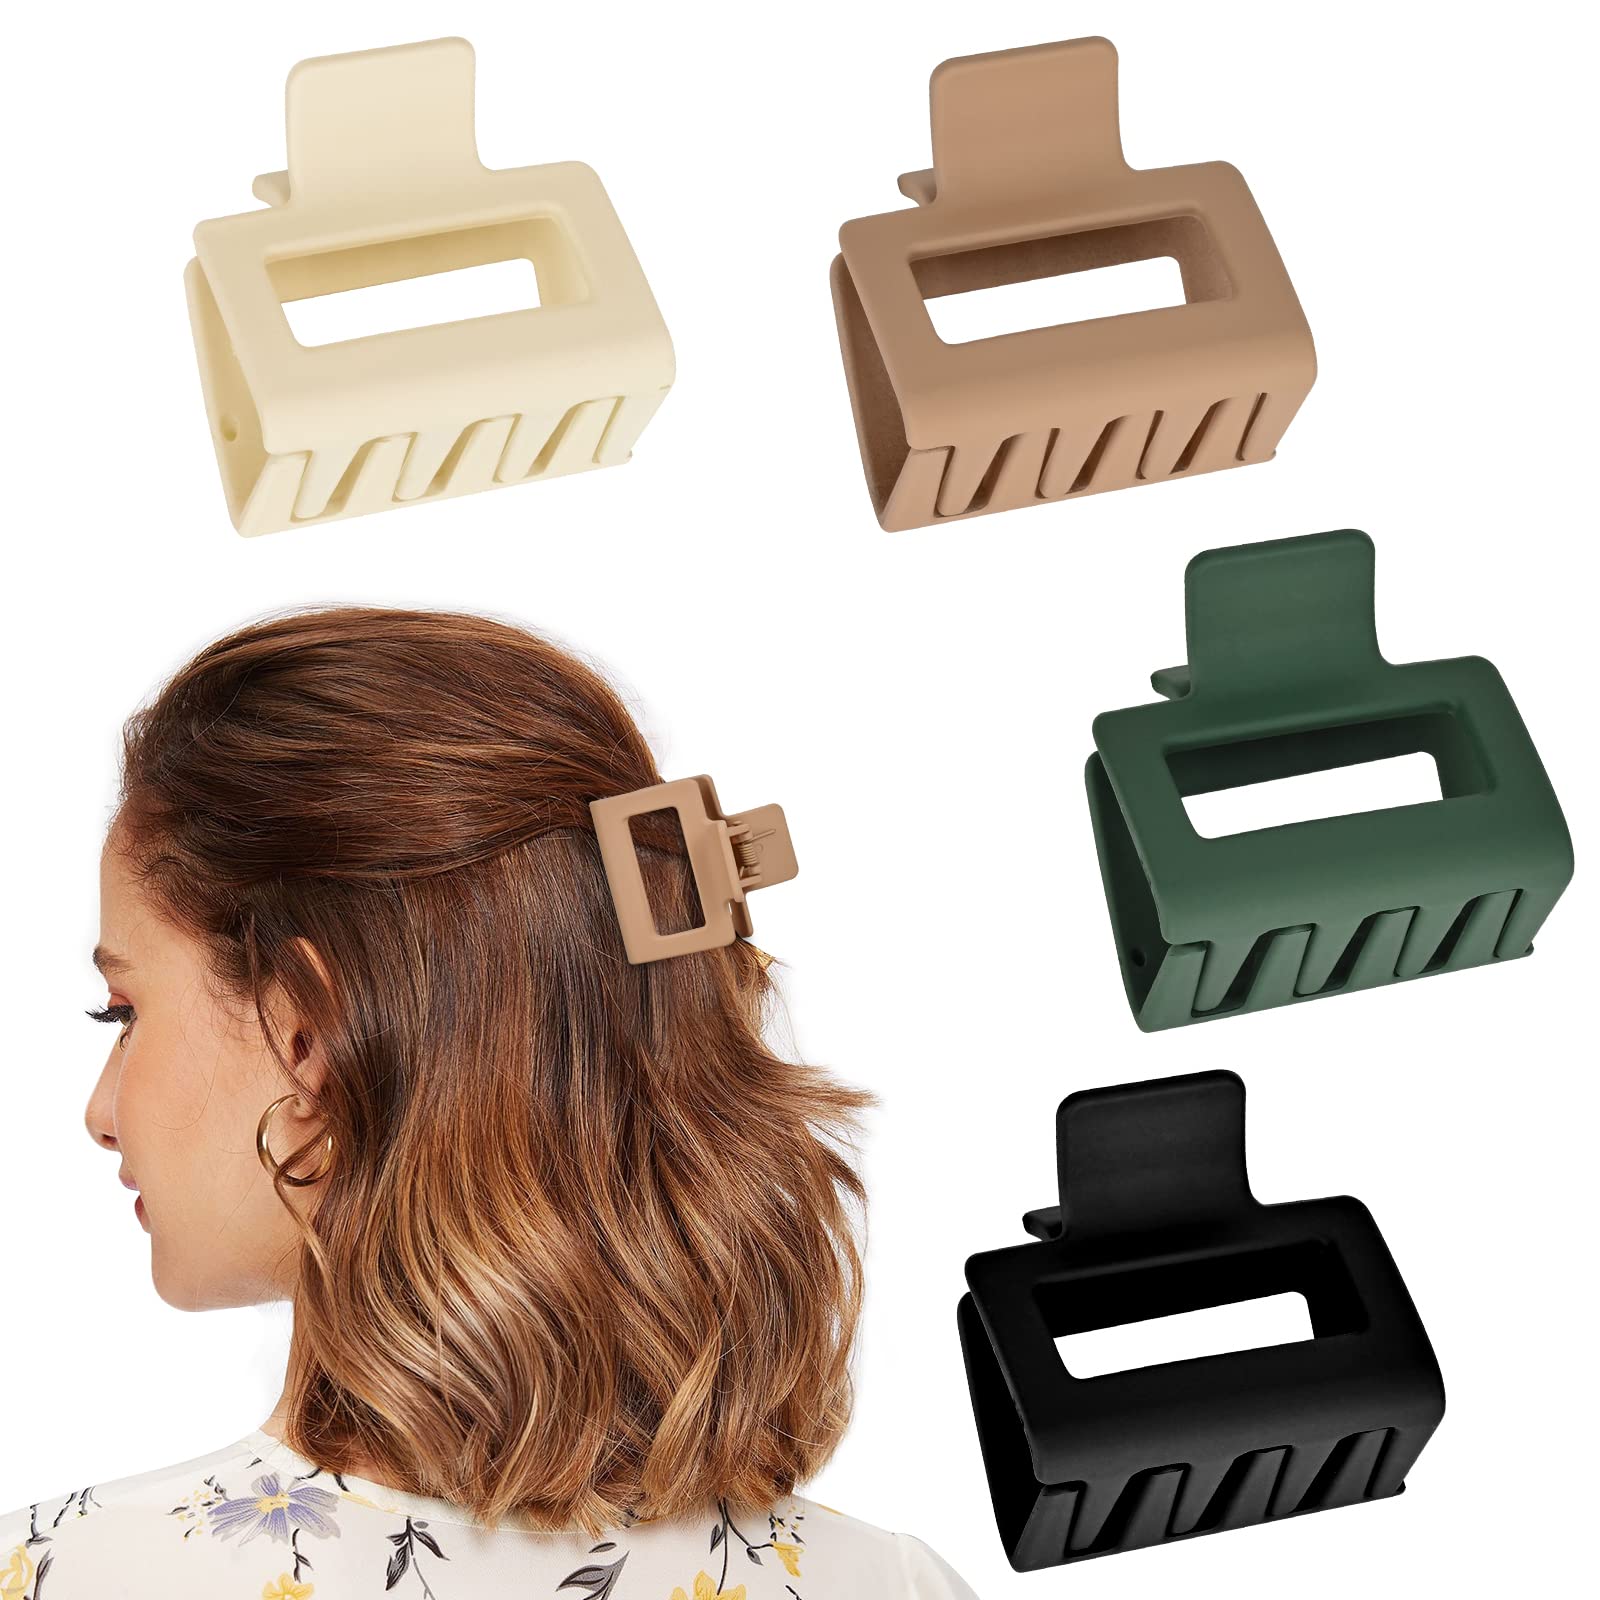  Hair Claw Clips for Women Thick Thin Hair - Big Hair Clips  Matte Claw Clips Medium Rectangle Claw Clip Strong Hold Cute Jaw Clip  Non-slip Hair Styling Accessories : Beauty